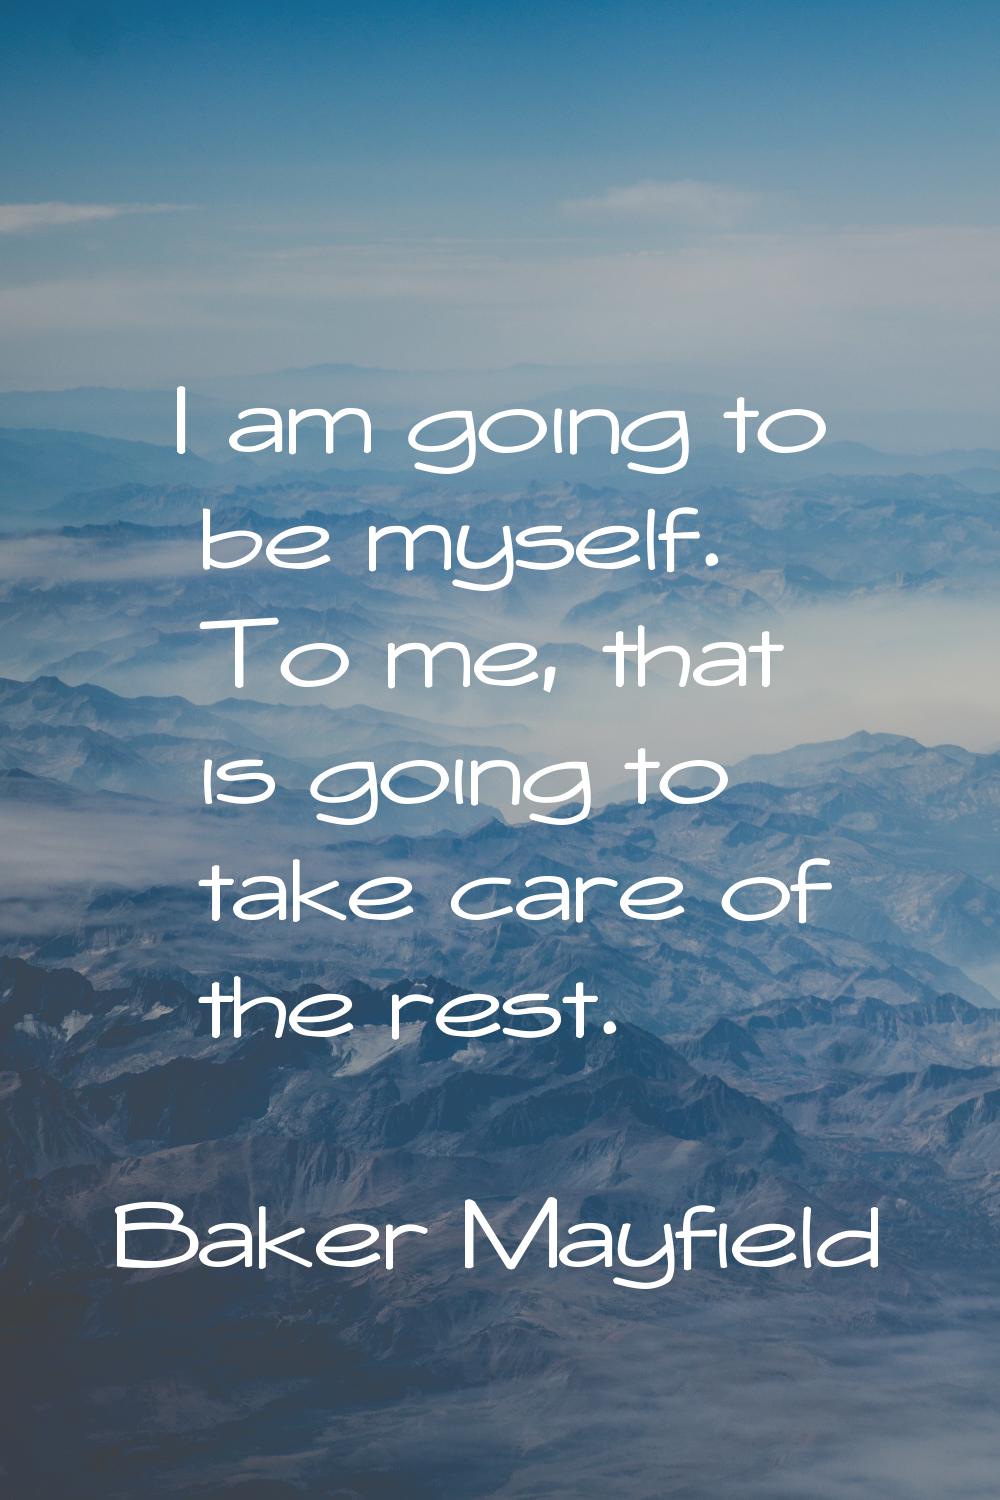 I am going to be myself. To me, that is going to take care of the rest.